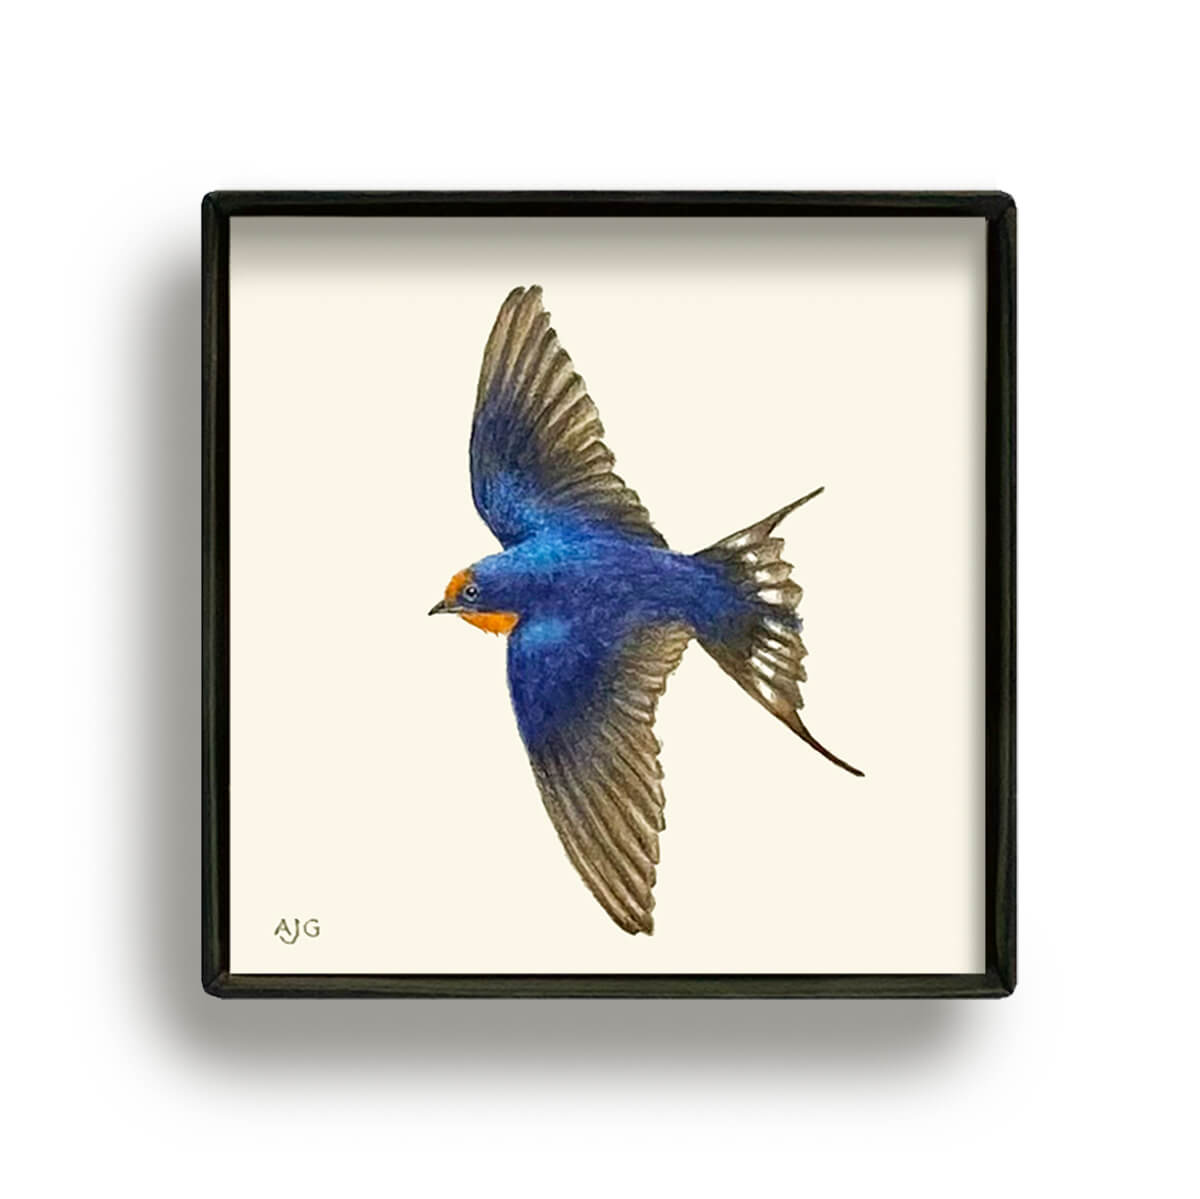 Swallow flying Picture Box miniature bird painting by Amanda Gosse